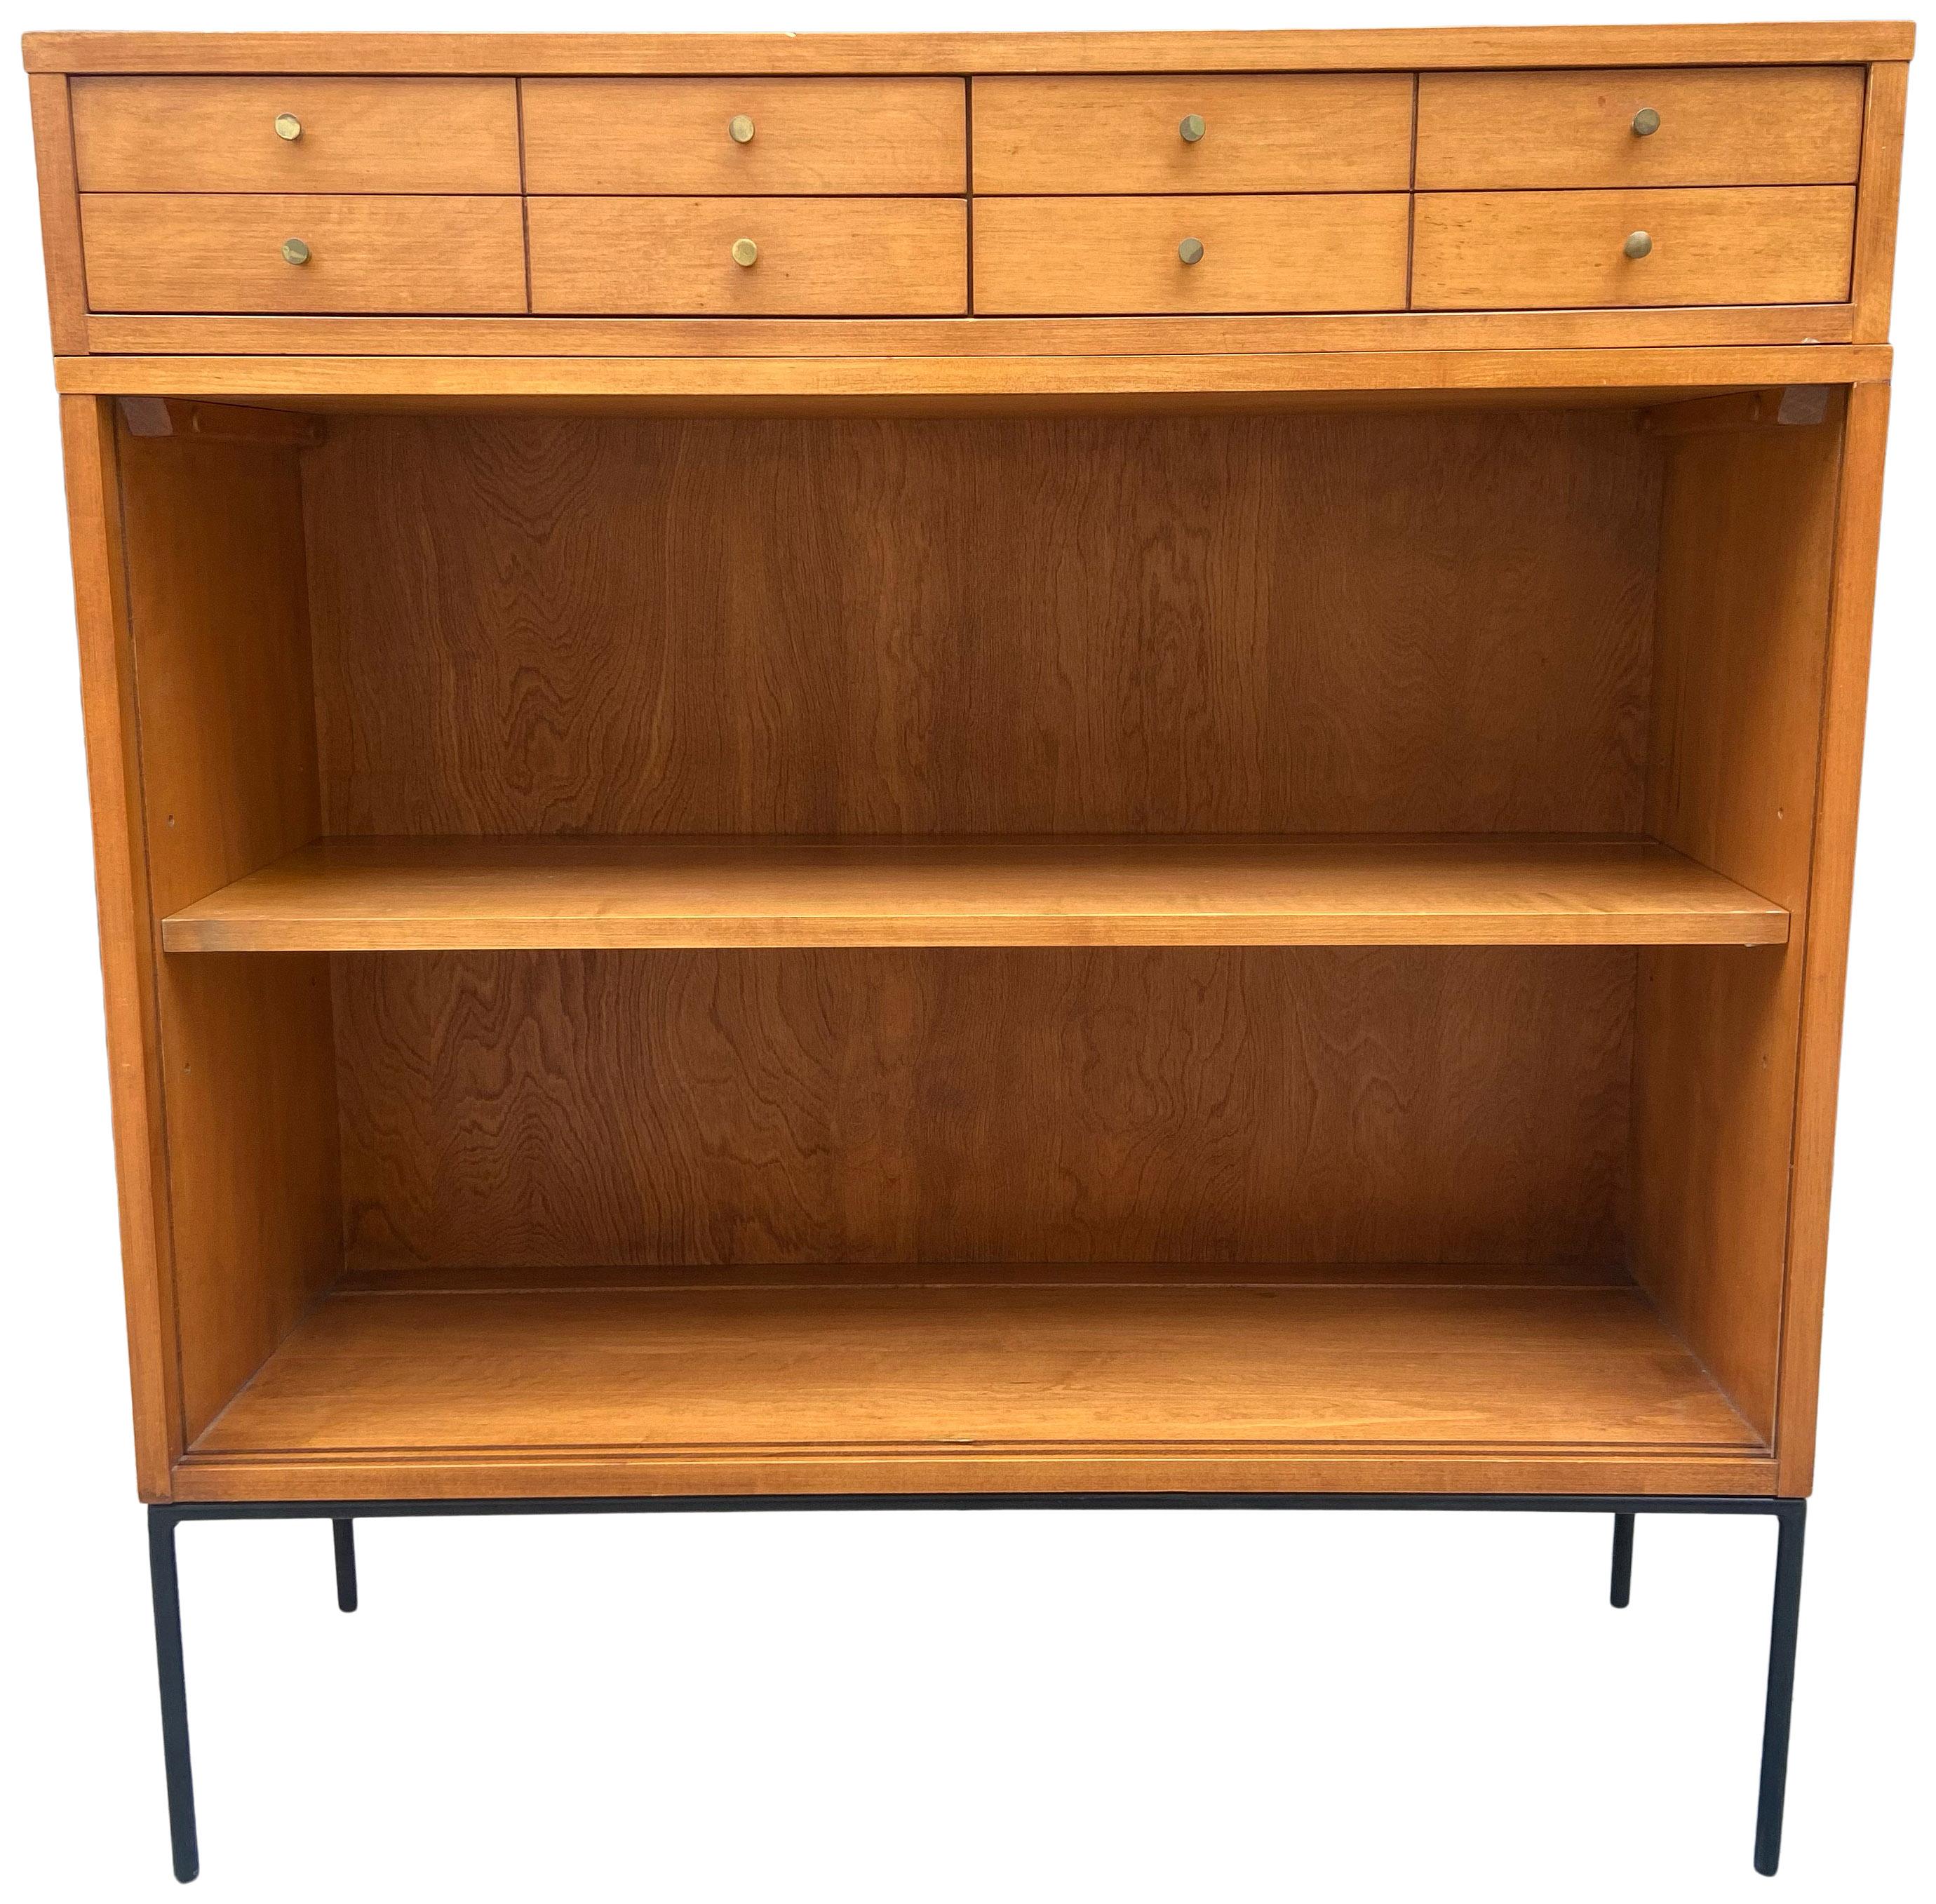 Vintage midcentury Paul McCobb single bookcase #1516 or display cabinet. Solid maple with original tobacco finish on iron base. Beautiful bookcase by Paul McCobb, circa 1950s Planner Group, shelf with adjustable positions, solid maple construction.